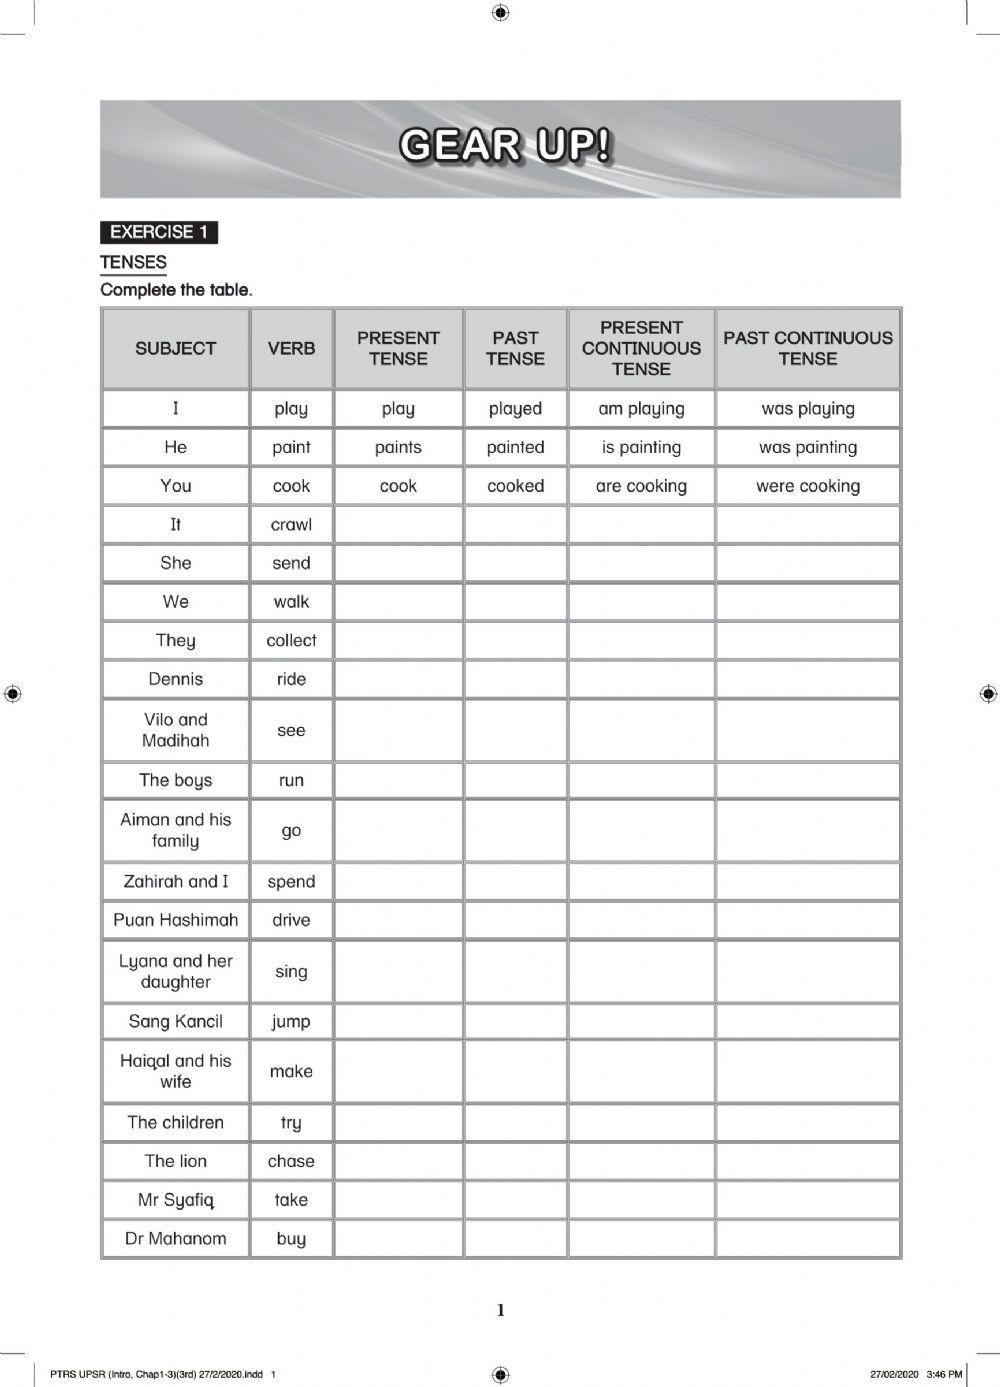 Complete the table (tenses)